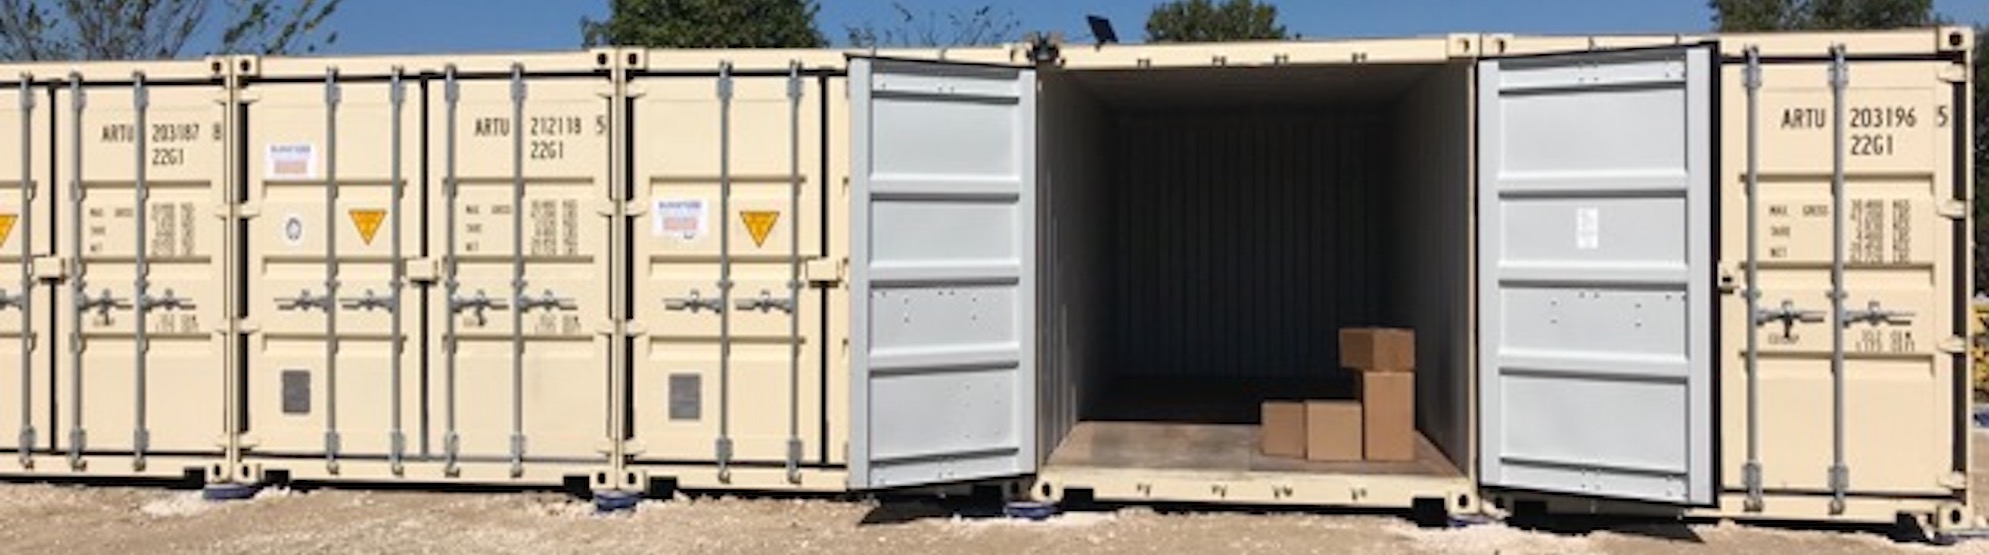 We Store America Self Storage rental containers